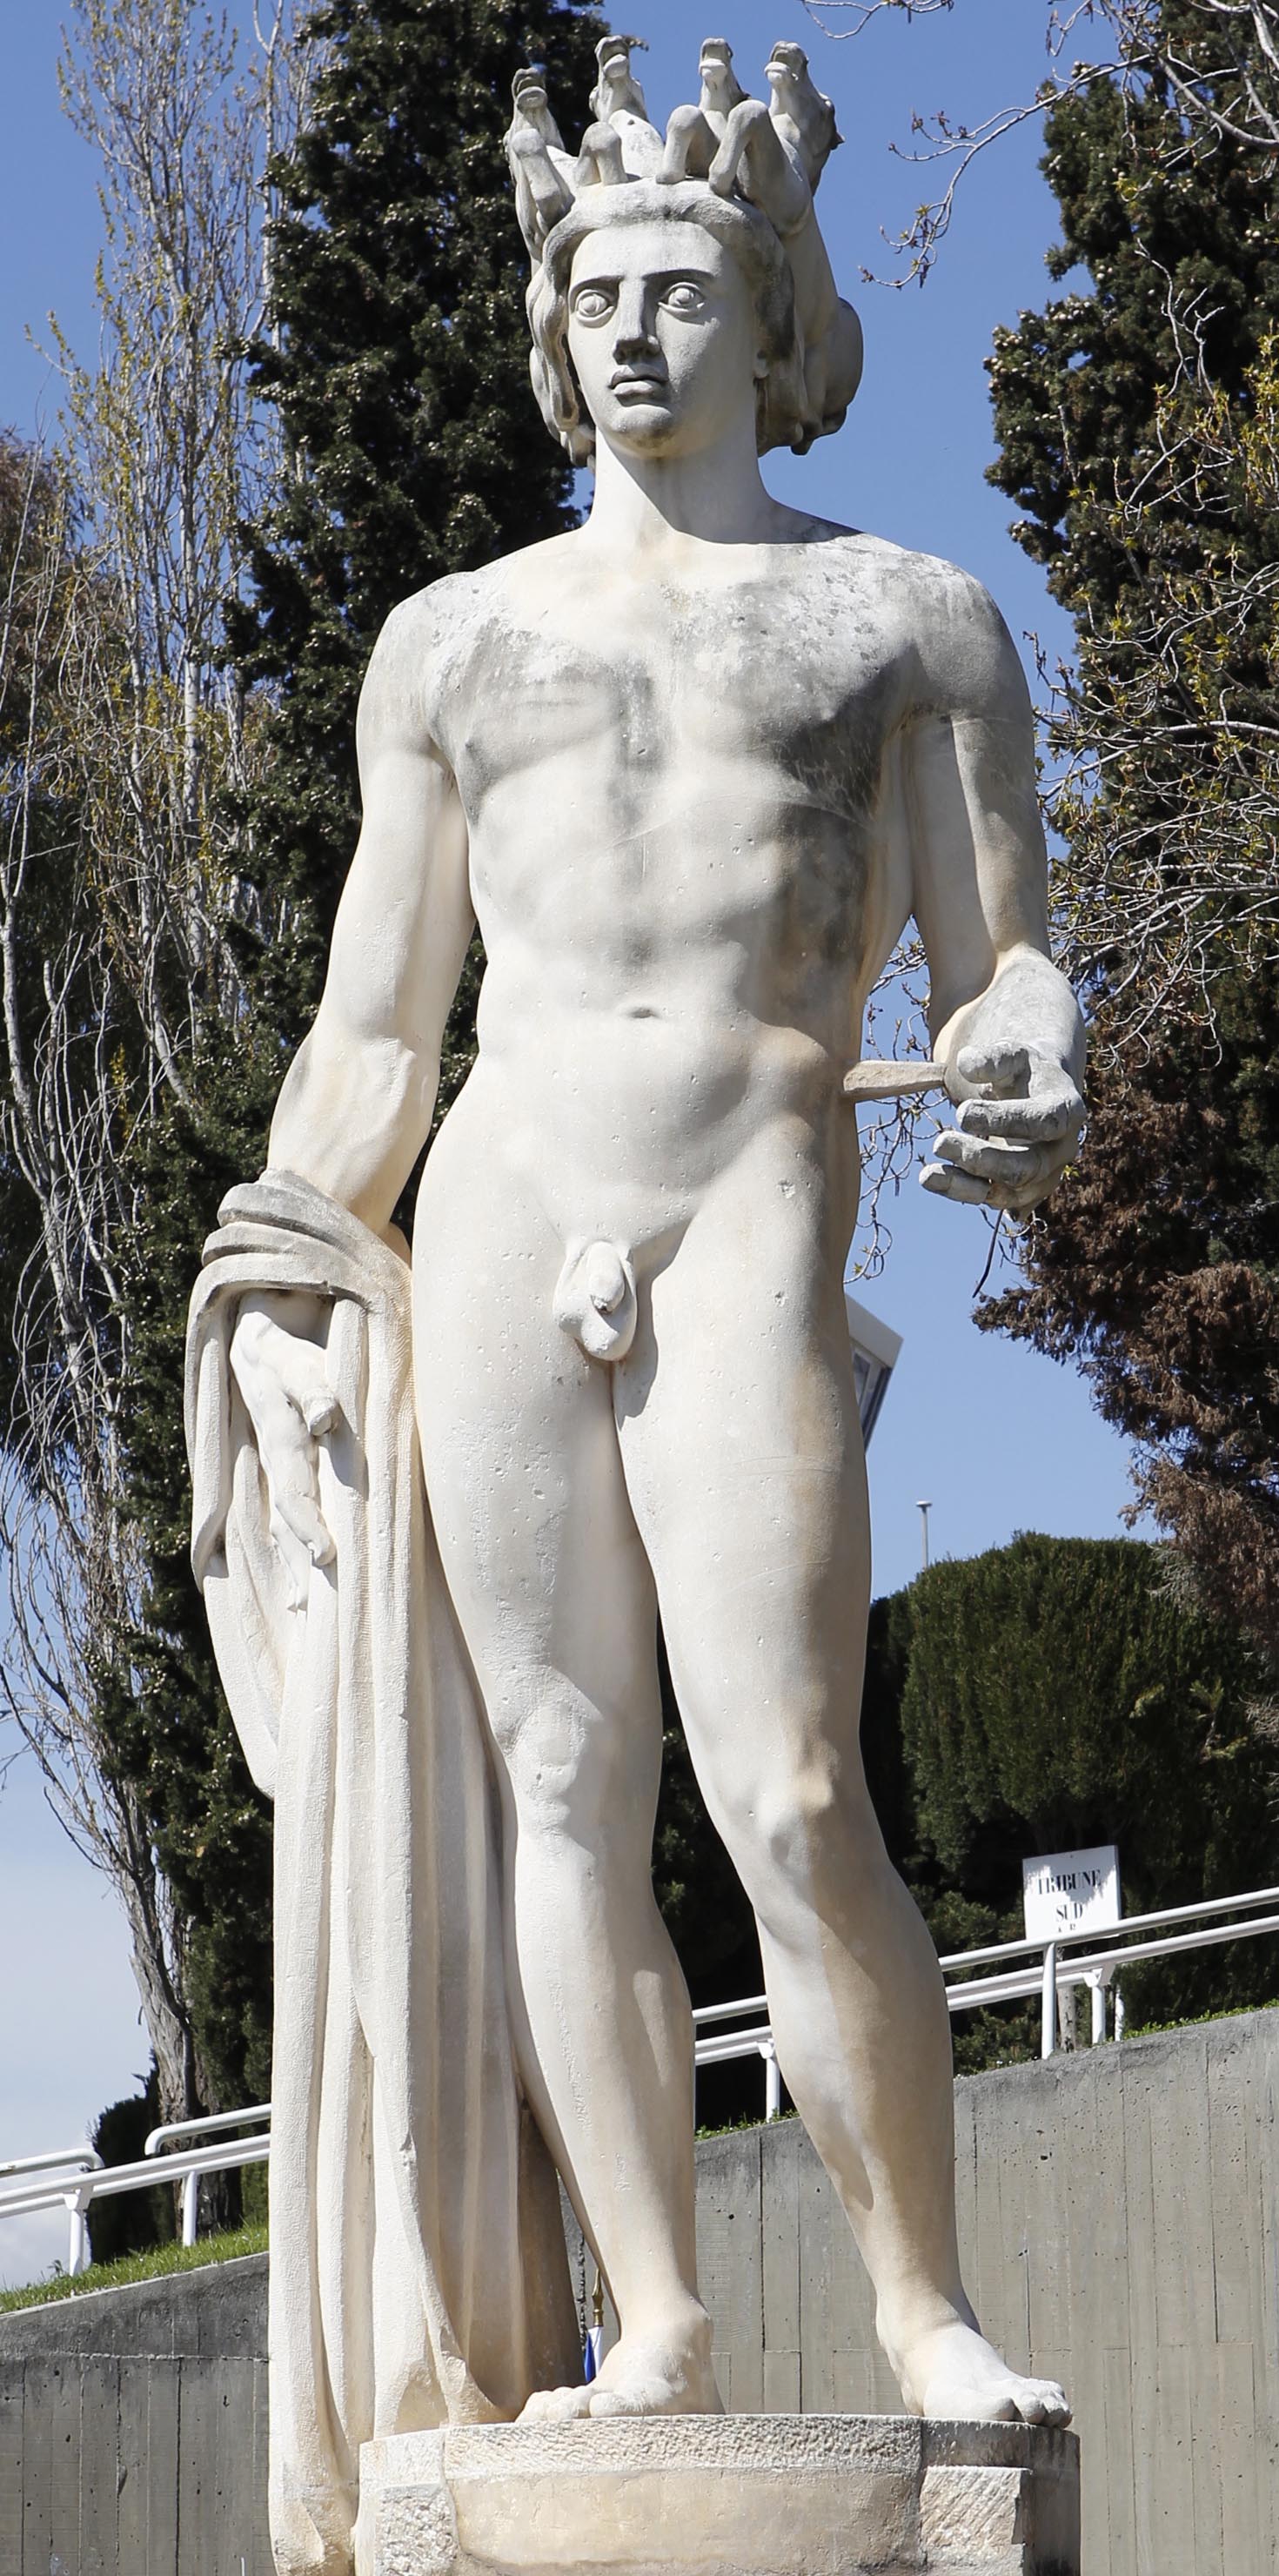 No Fig Leaf for Apollo Statue - Best of Nice